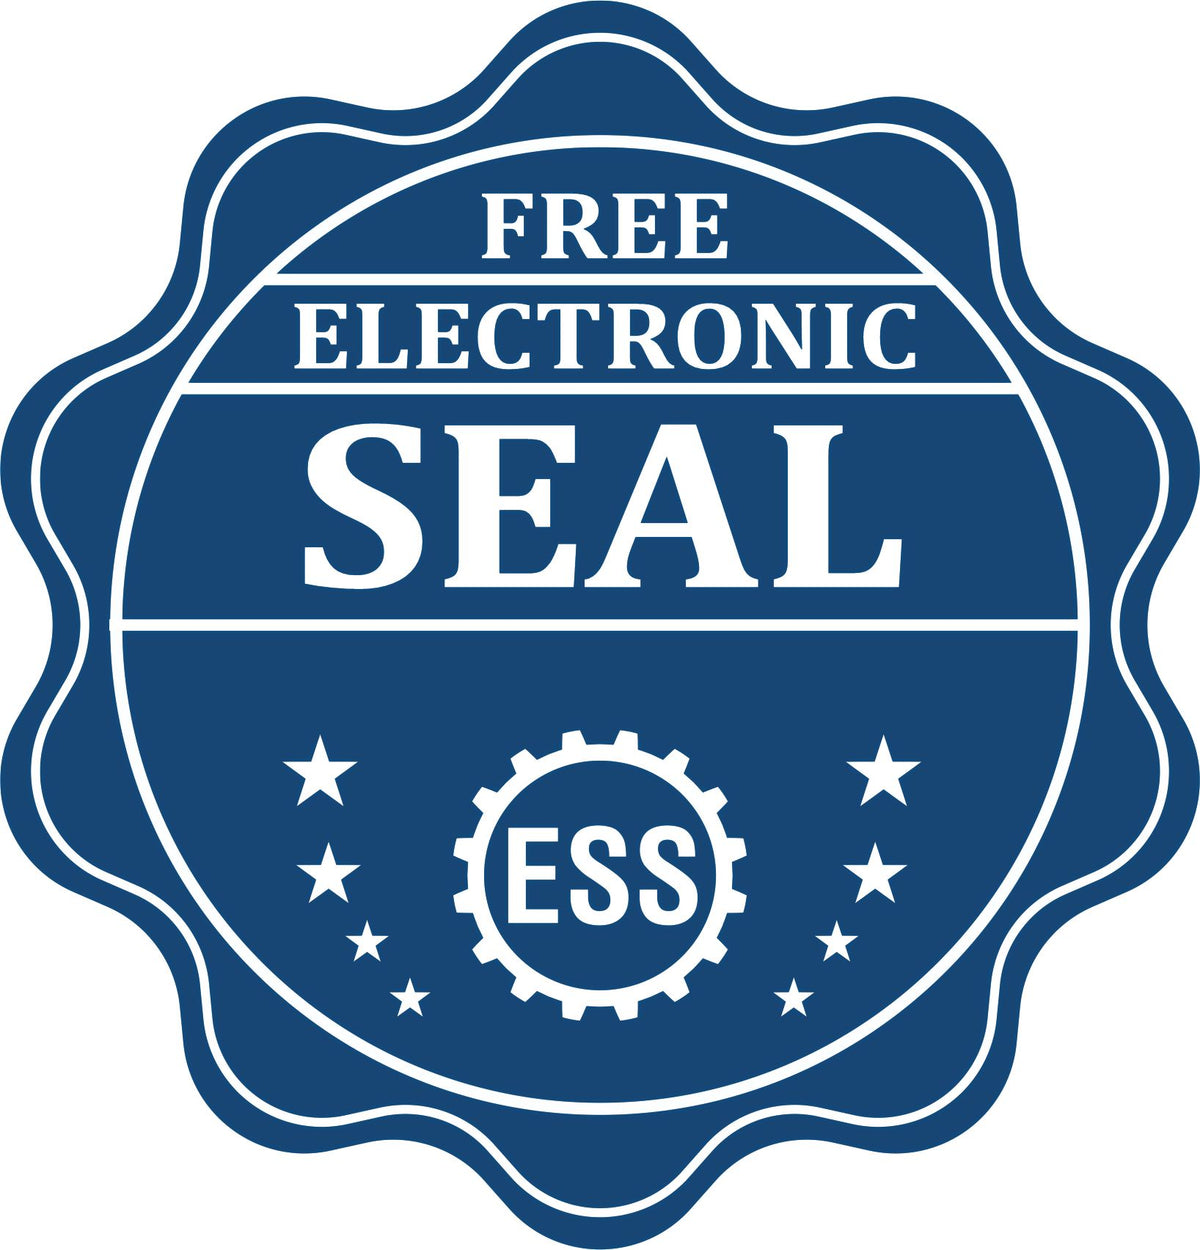 A badge showing a free electronic seal for the Handheld Vermont Architect Seal Embosser with stars and the ESS gear on the emblem.